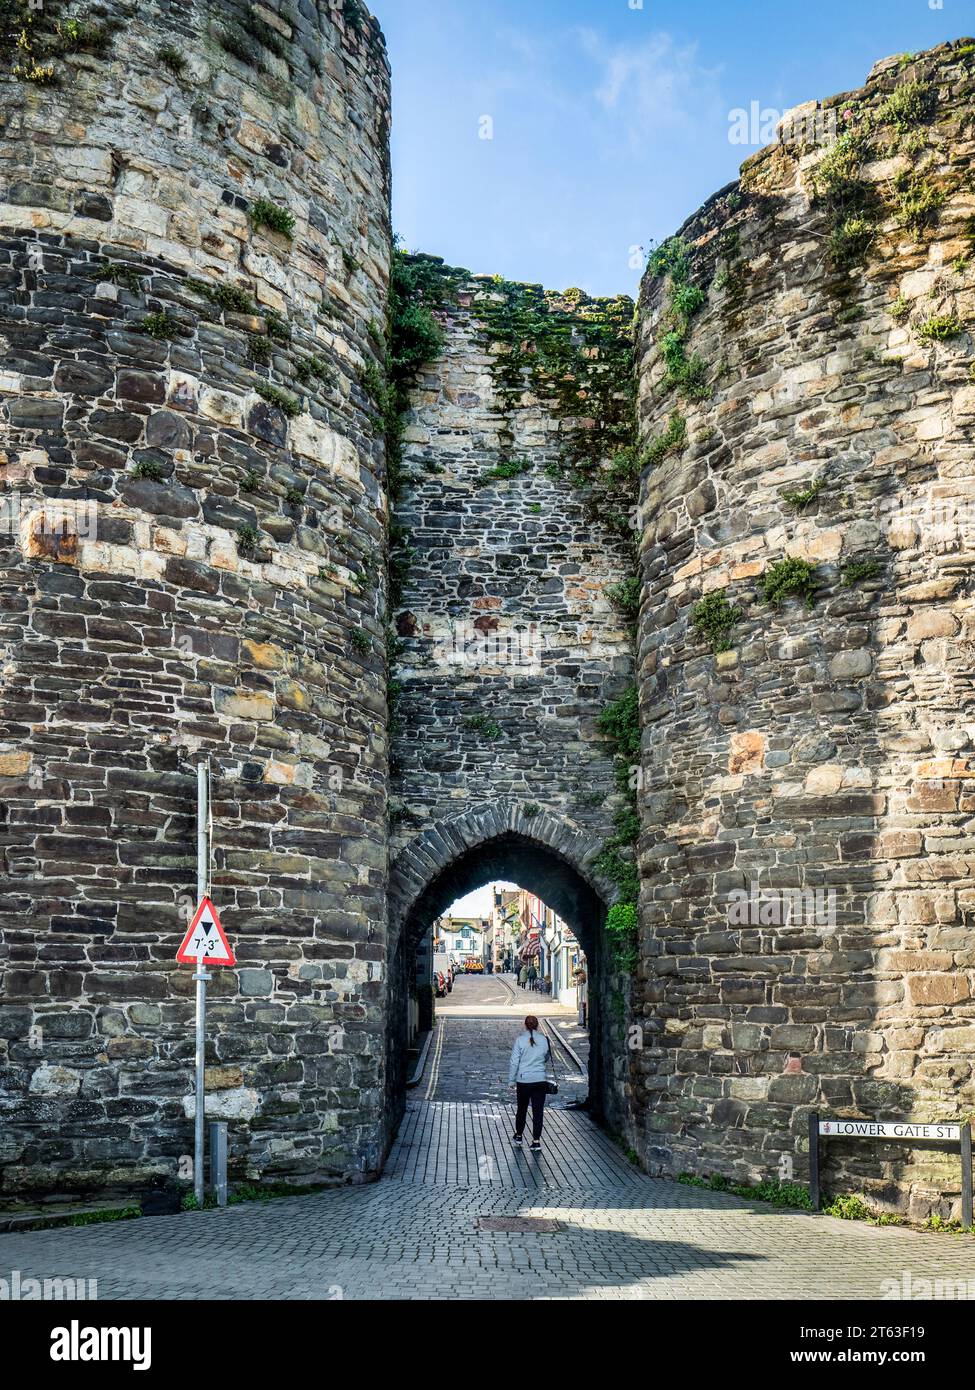 29 September 2023: Conwy, North Wales - The Lower Gate in the town walls of Conwy, North Wales, leading out to the riverside quay. Stock Photo